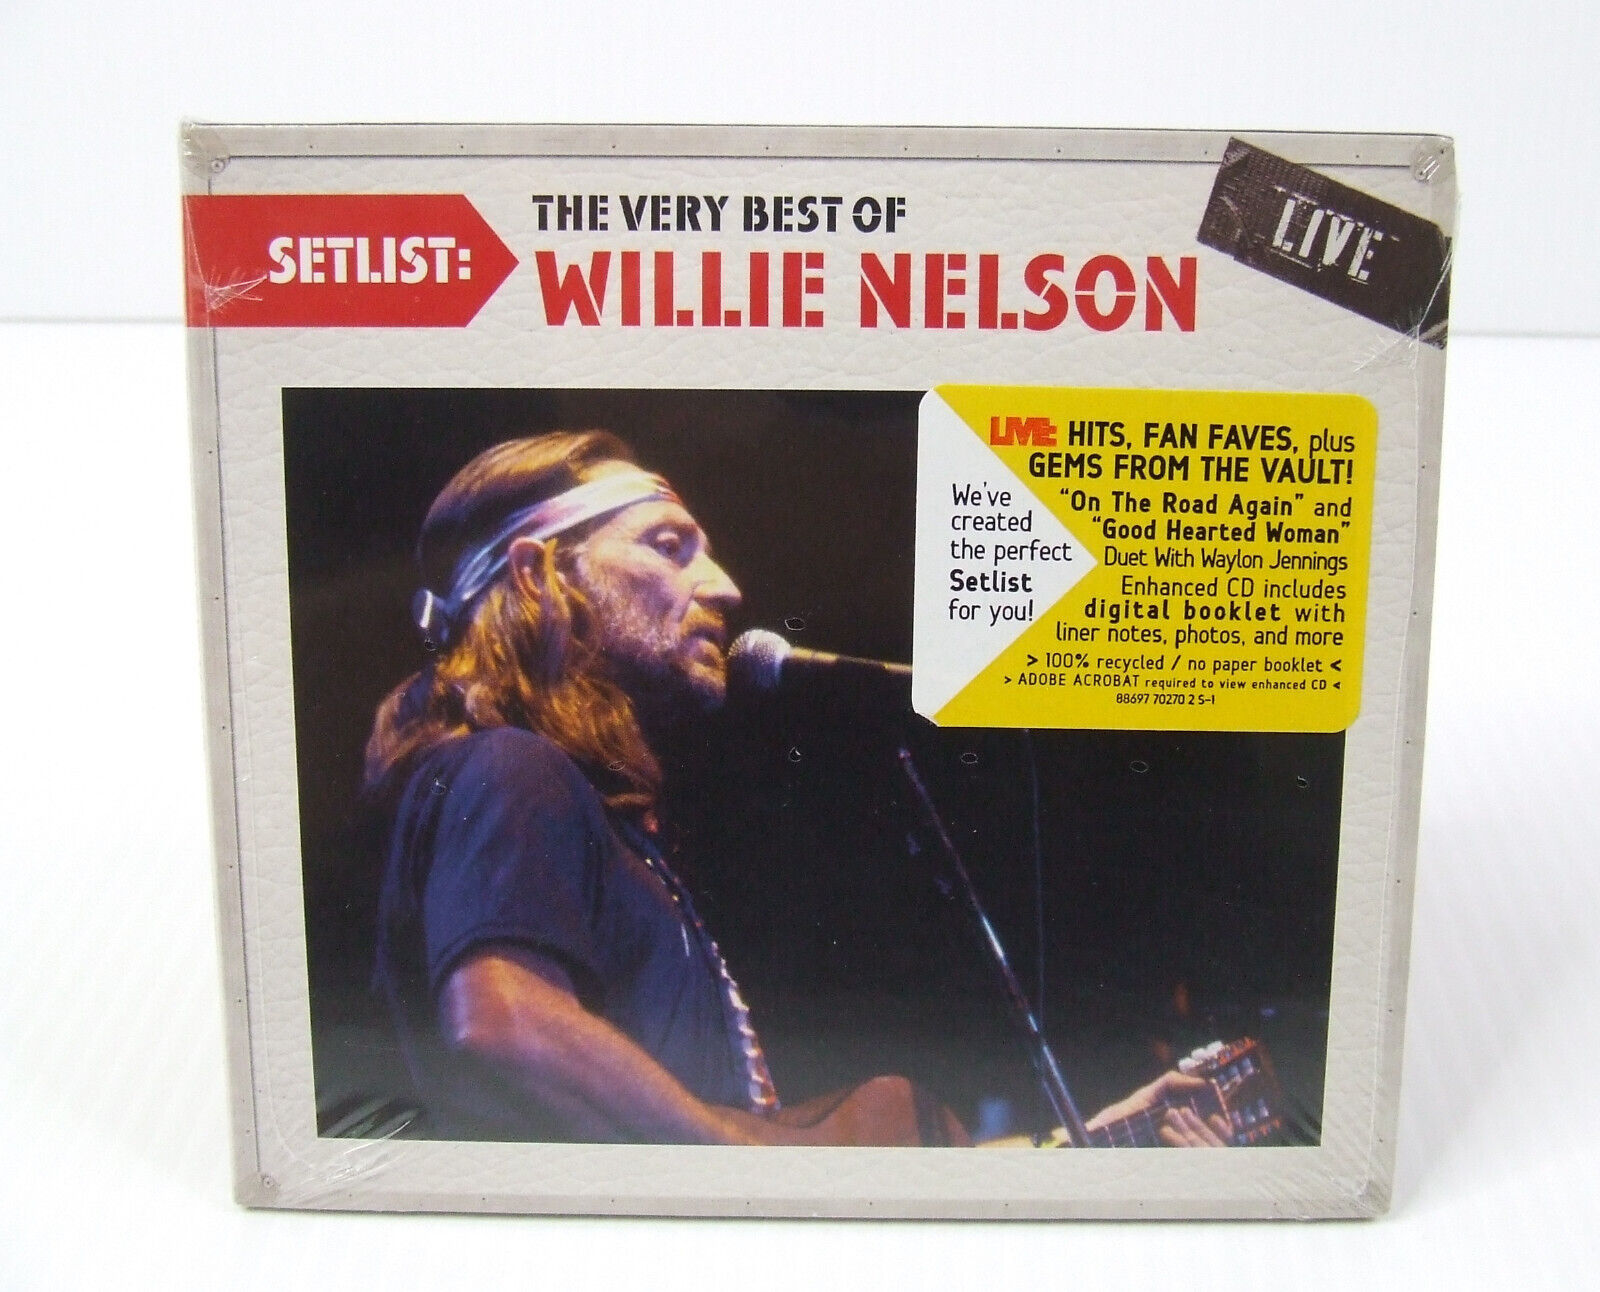 Willie Nelson - Setlist: The Best of Willie Nelson Live (CD, 2010) Read Below